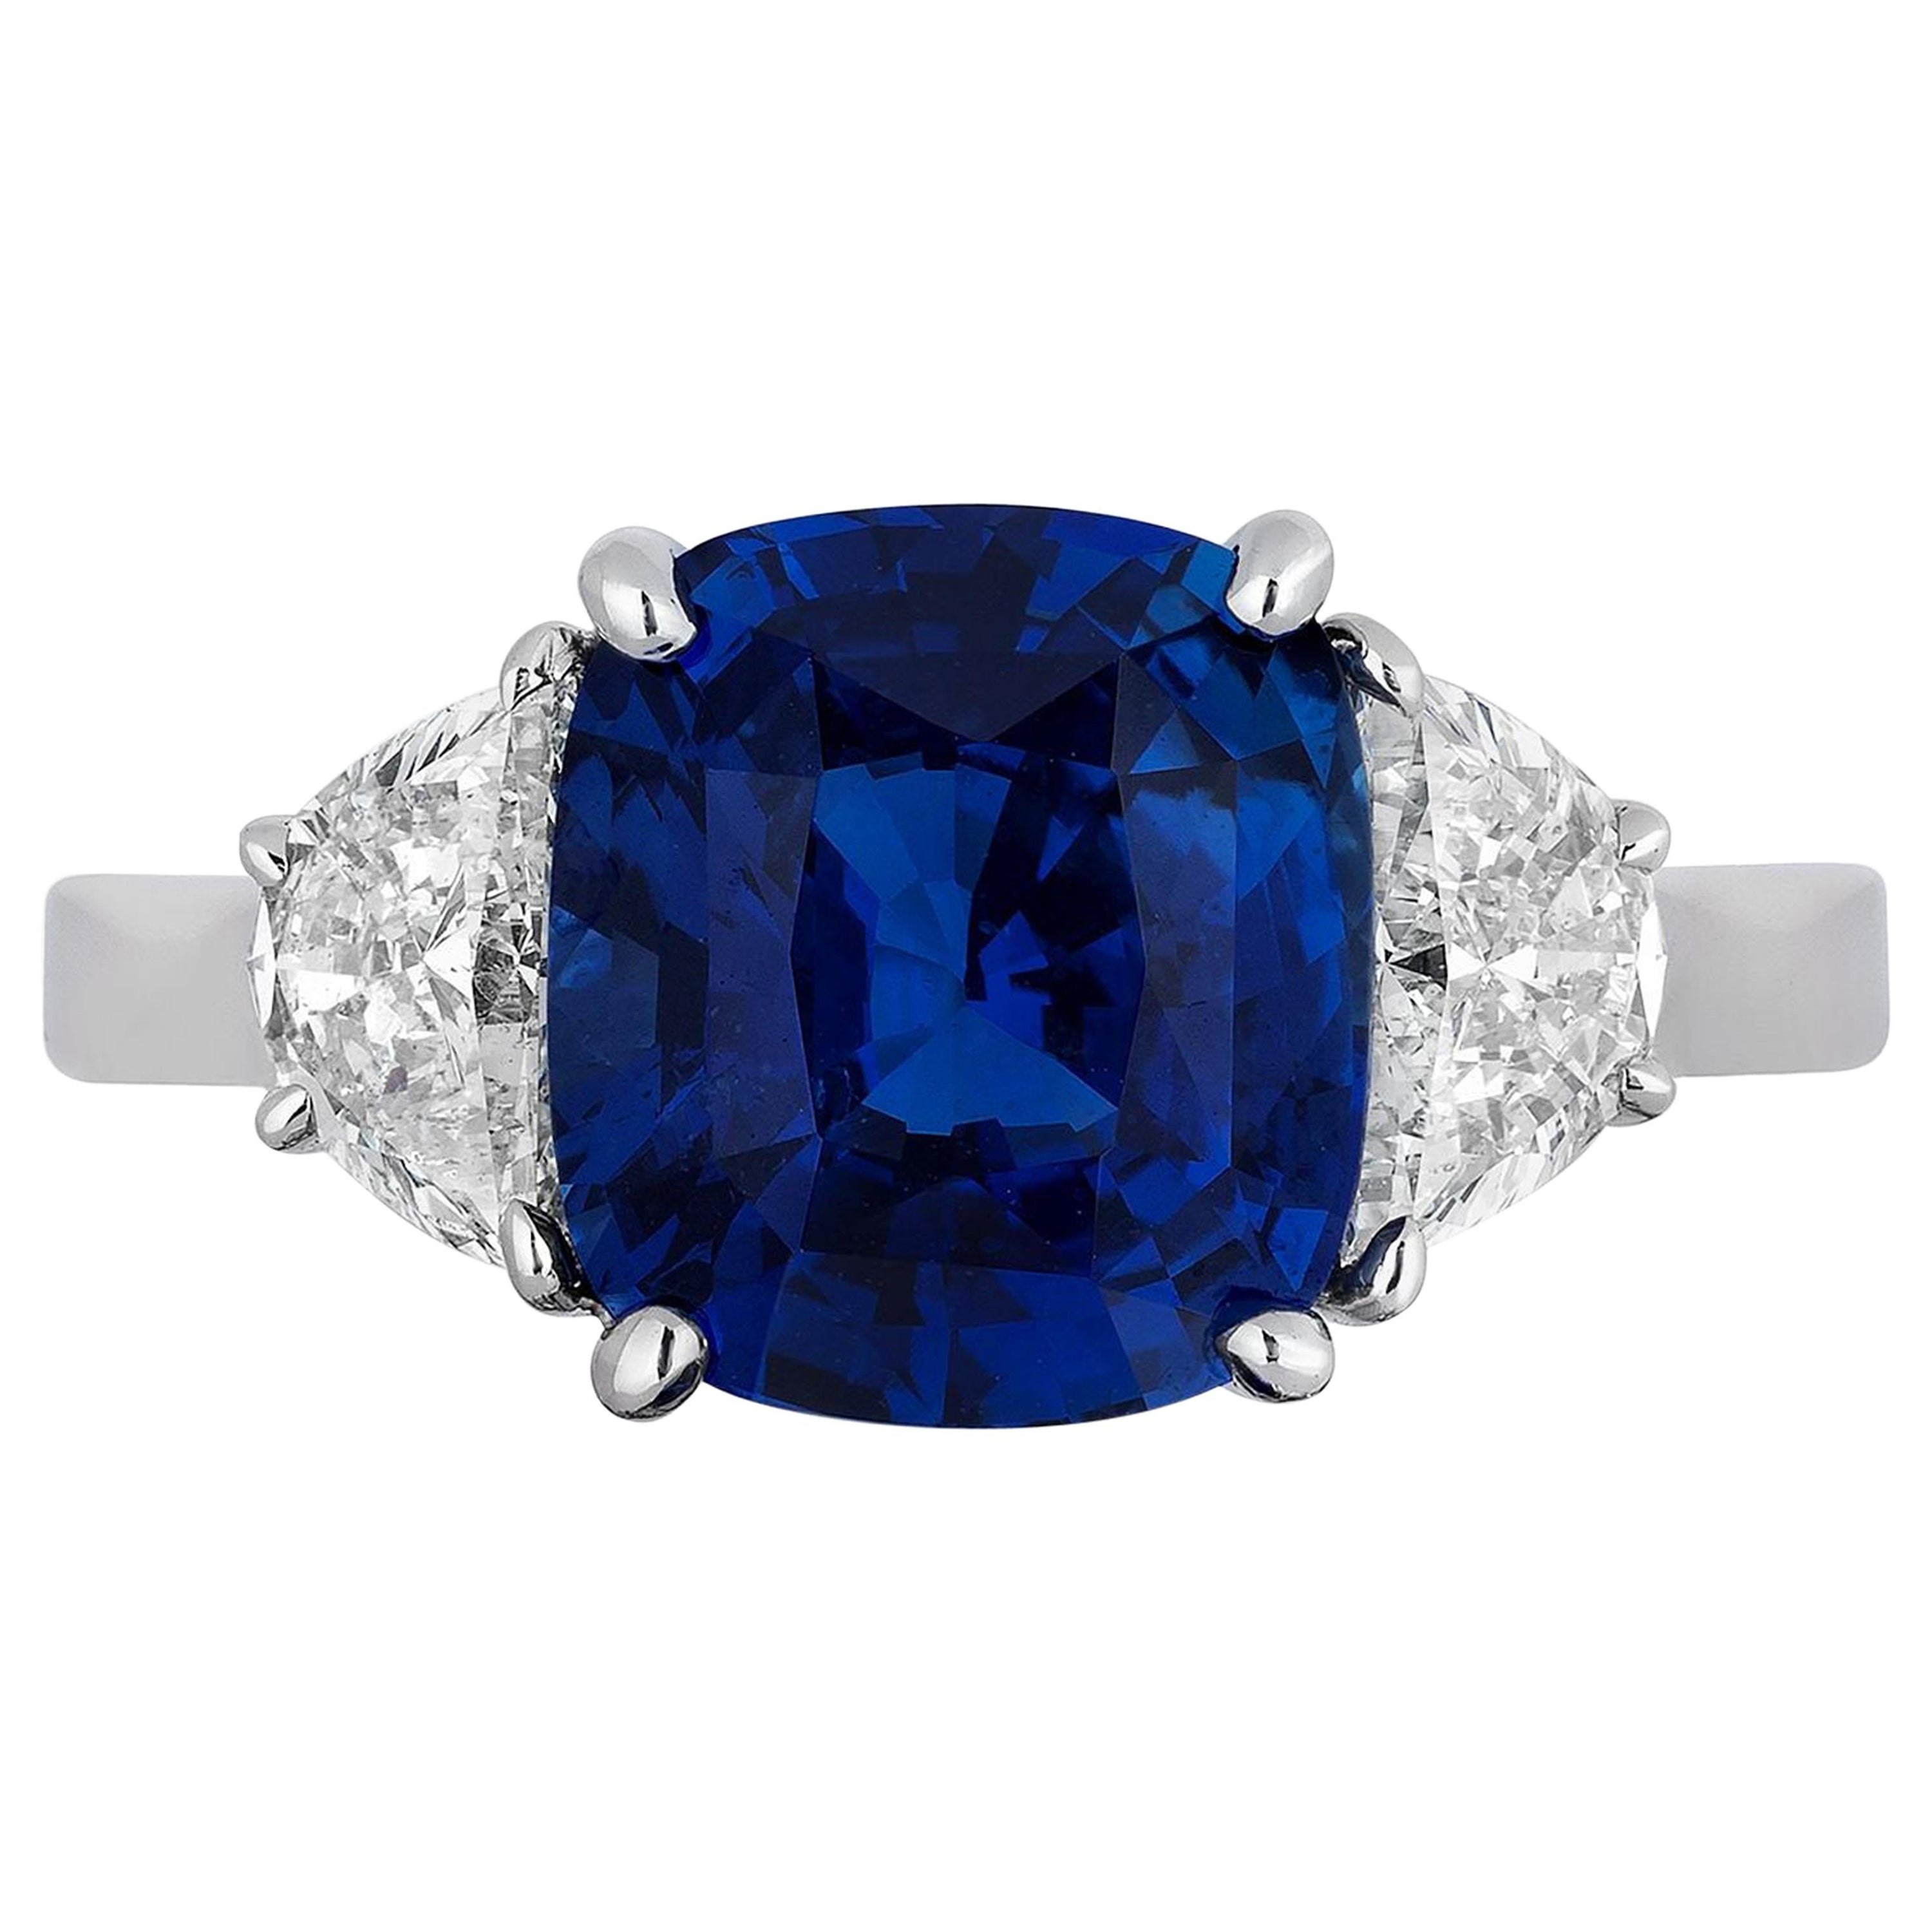 CDC Certified 4.01 Carat Sapphire Diamond Cocktail Ring For Sale